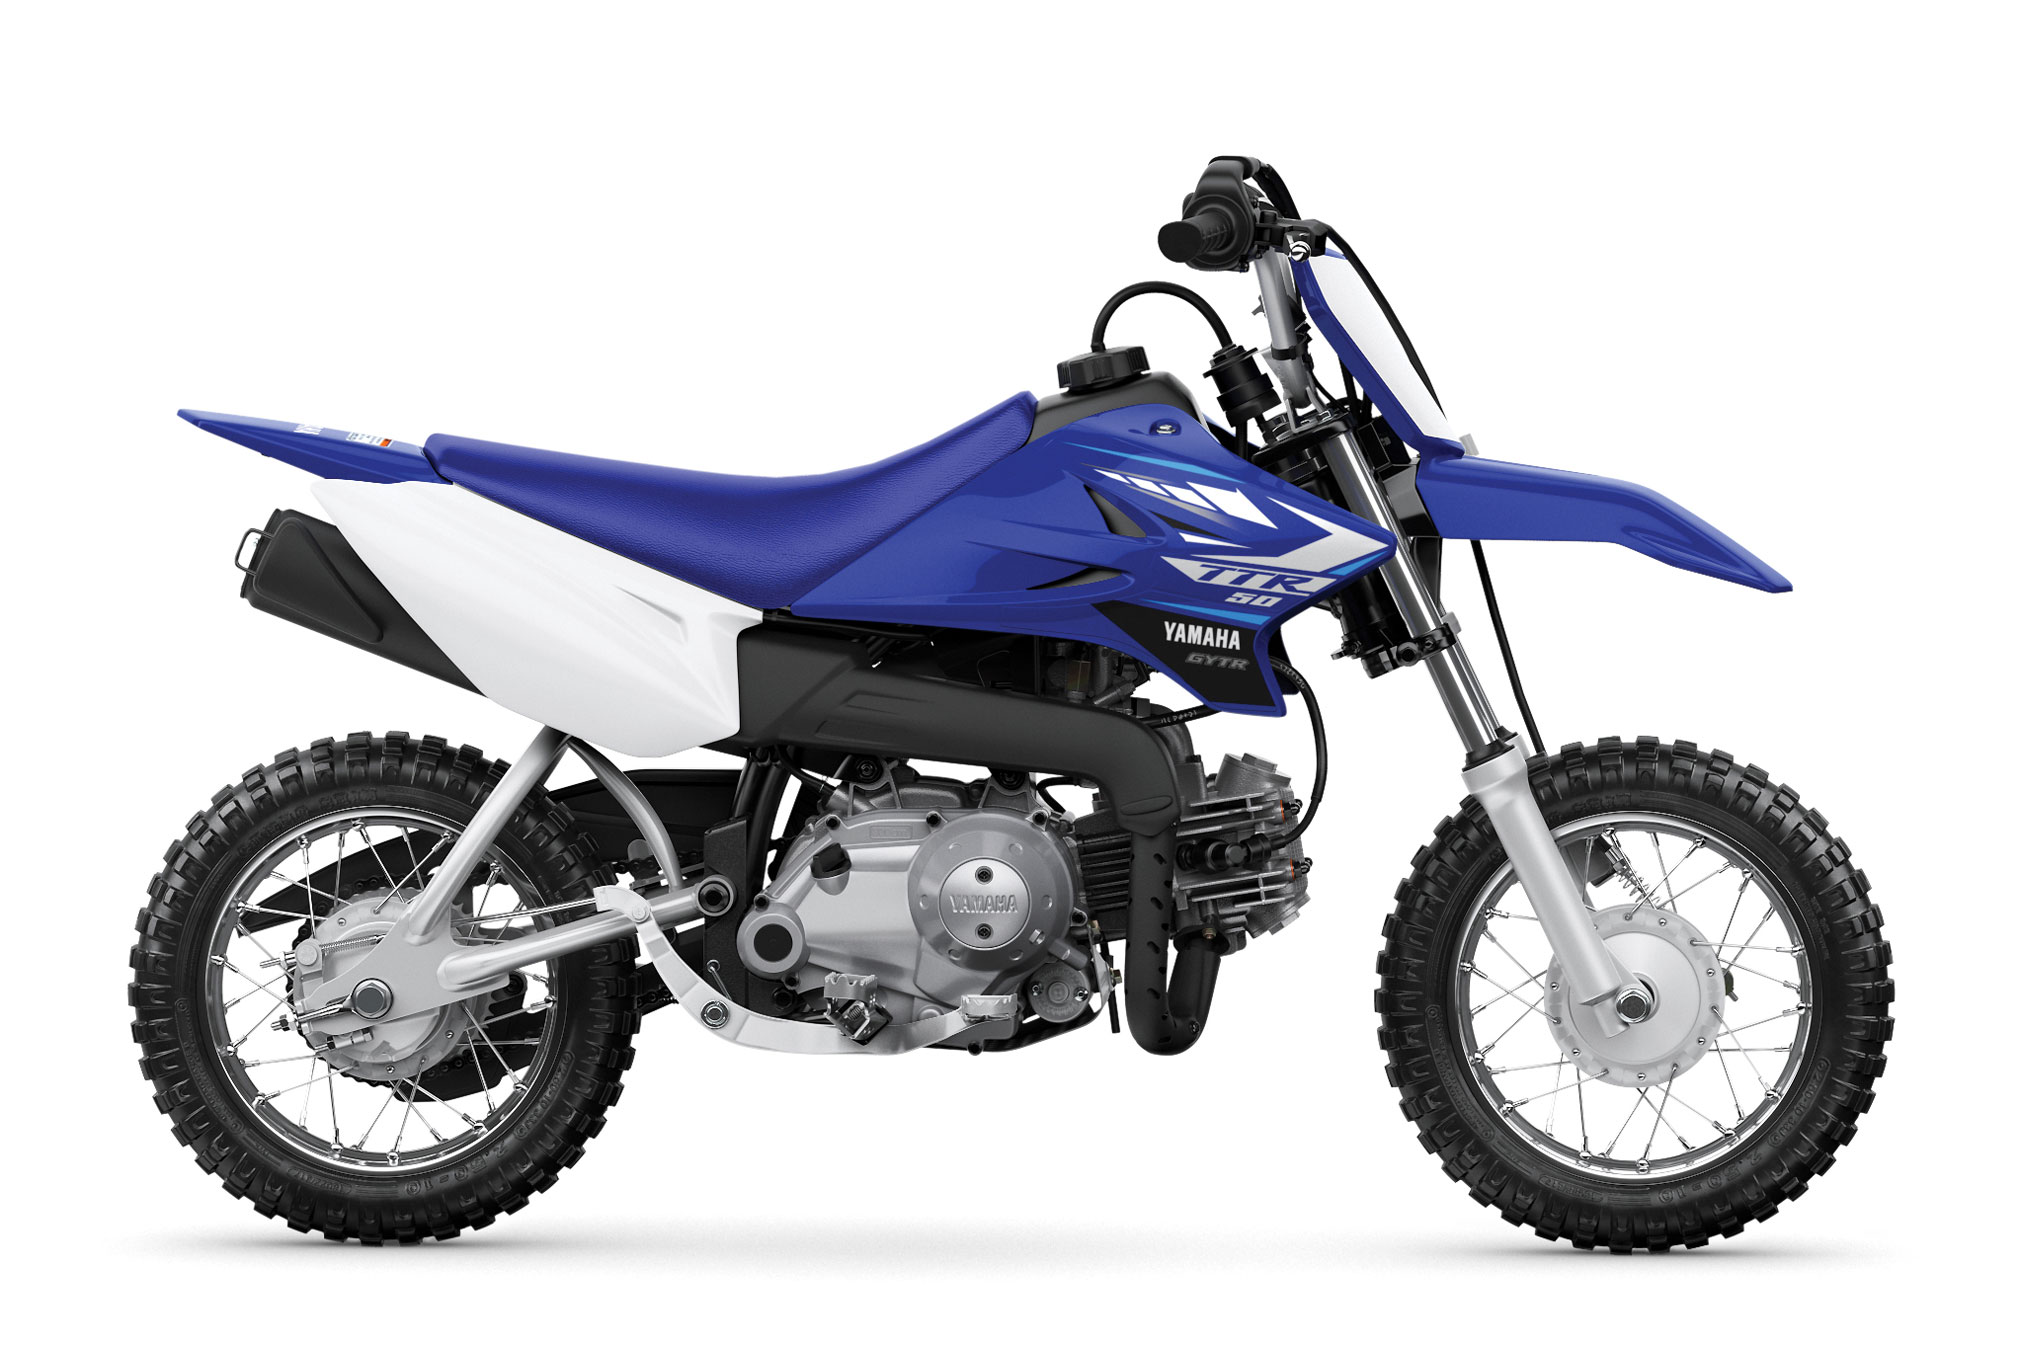 2020 Yamaha TTR50E Guide • Total Motorcycle